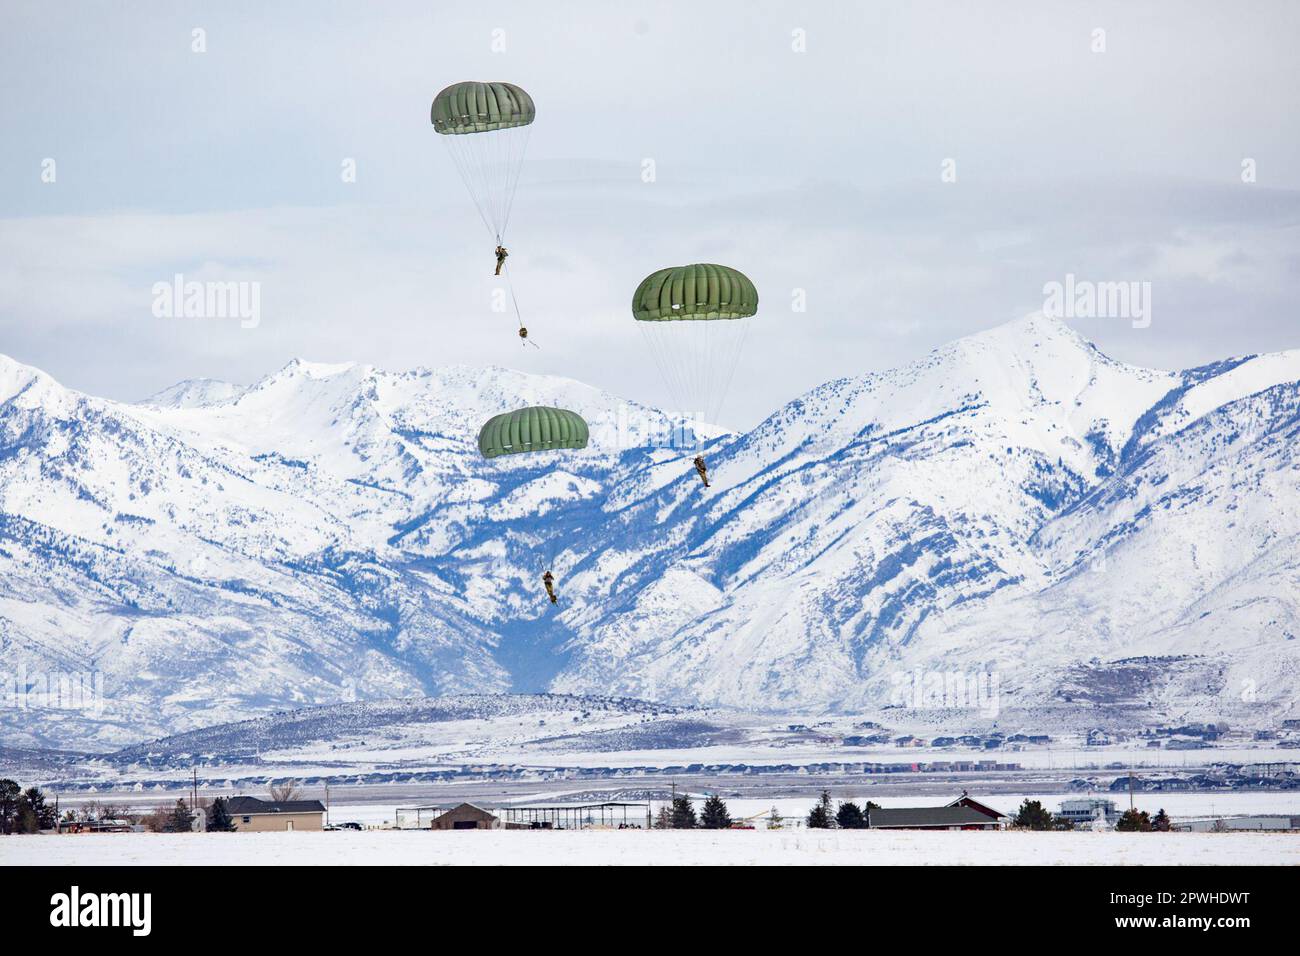 U.S. Army Paratroopers assigned to the 19th Special Forces Group (Airborne), prepare to complete the proper landing procedures to prevent the risk of injuries during an Airborne jump on February 25, 2023 near Camp Williams, Utah. Parachute landing fall known as PLF is a safety technique that allows a parachutist to land safely and to displace the energy of the body contacting the earth at high speeds. (Utah Army National Guard photo by Spc. Christopher Hall) Stock Photo